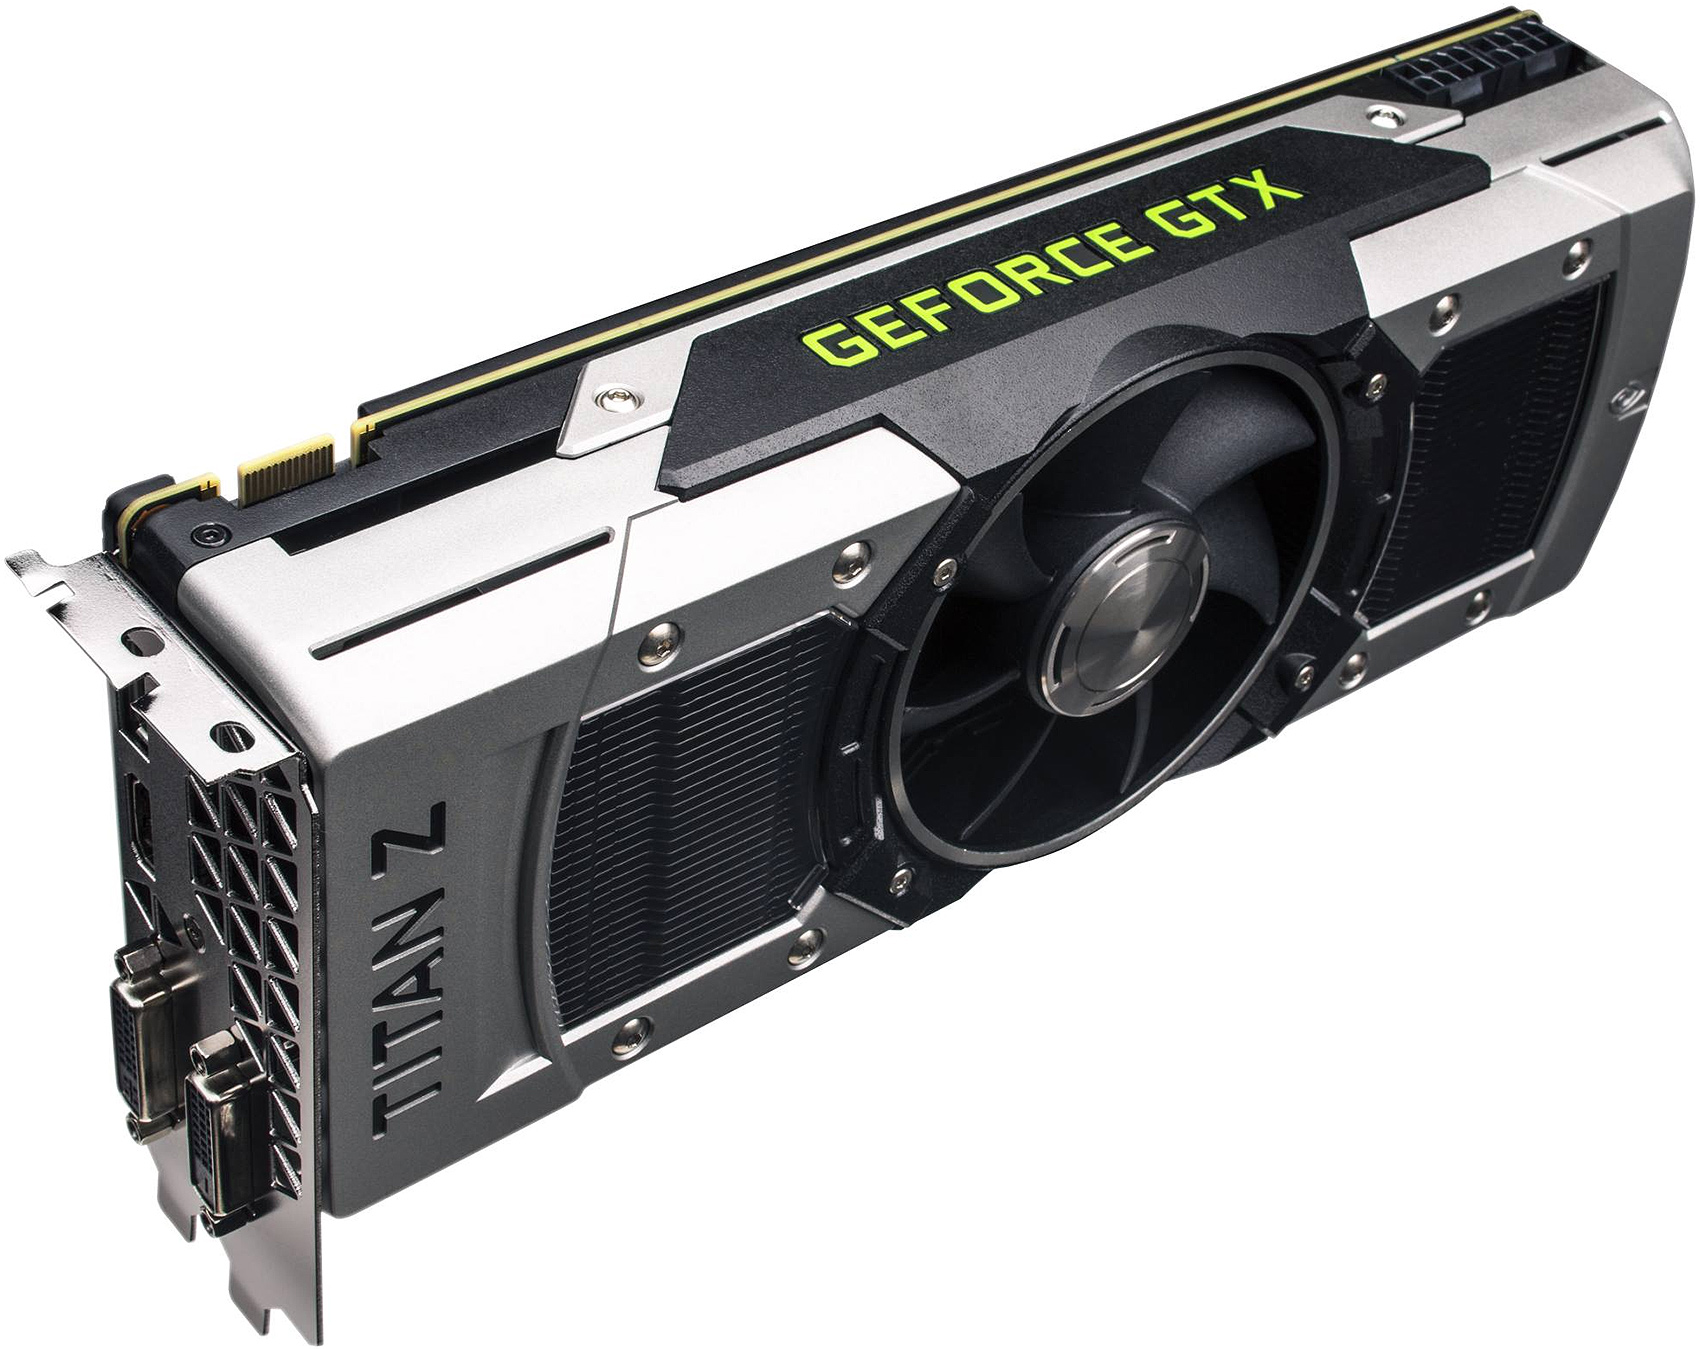 Nvidia GeForce GTX Titan Z is finally available. But what ...